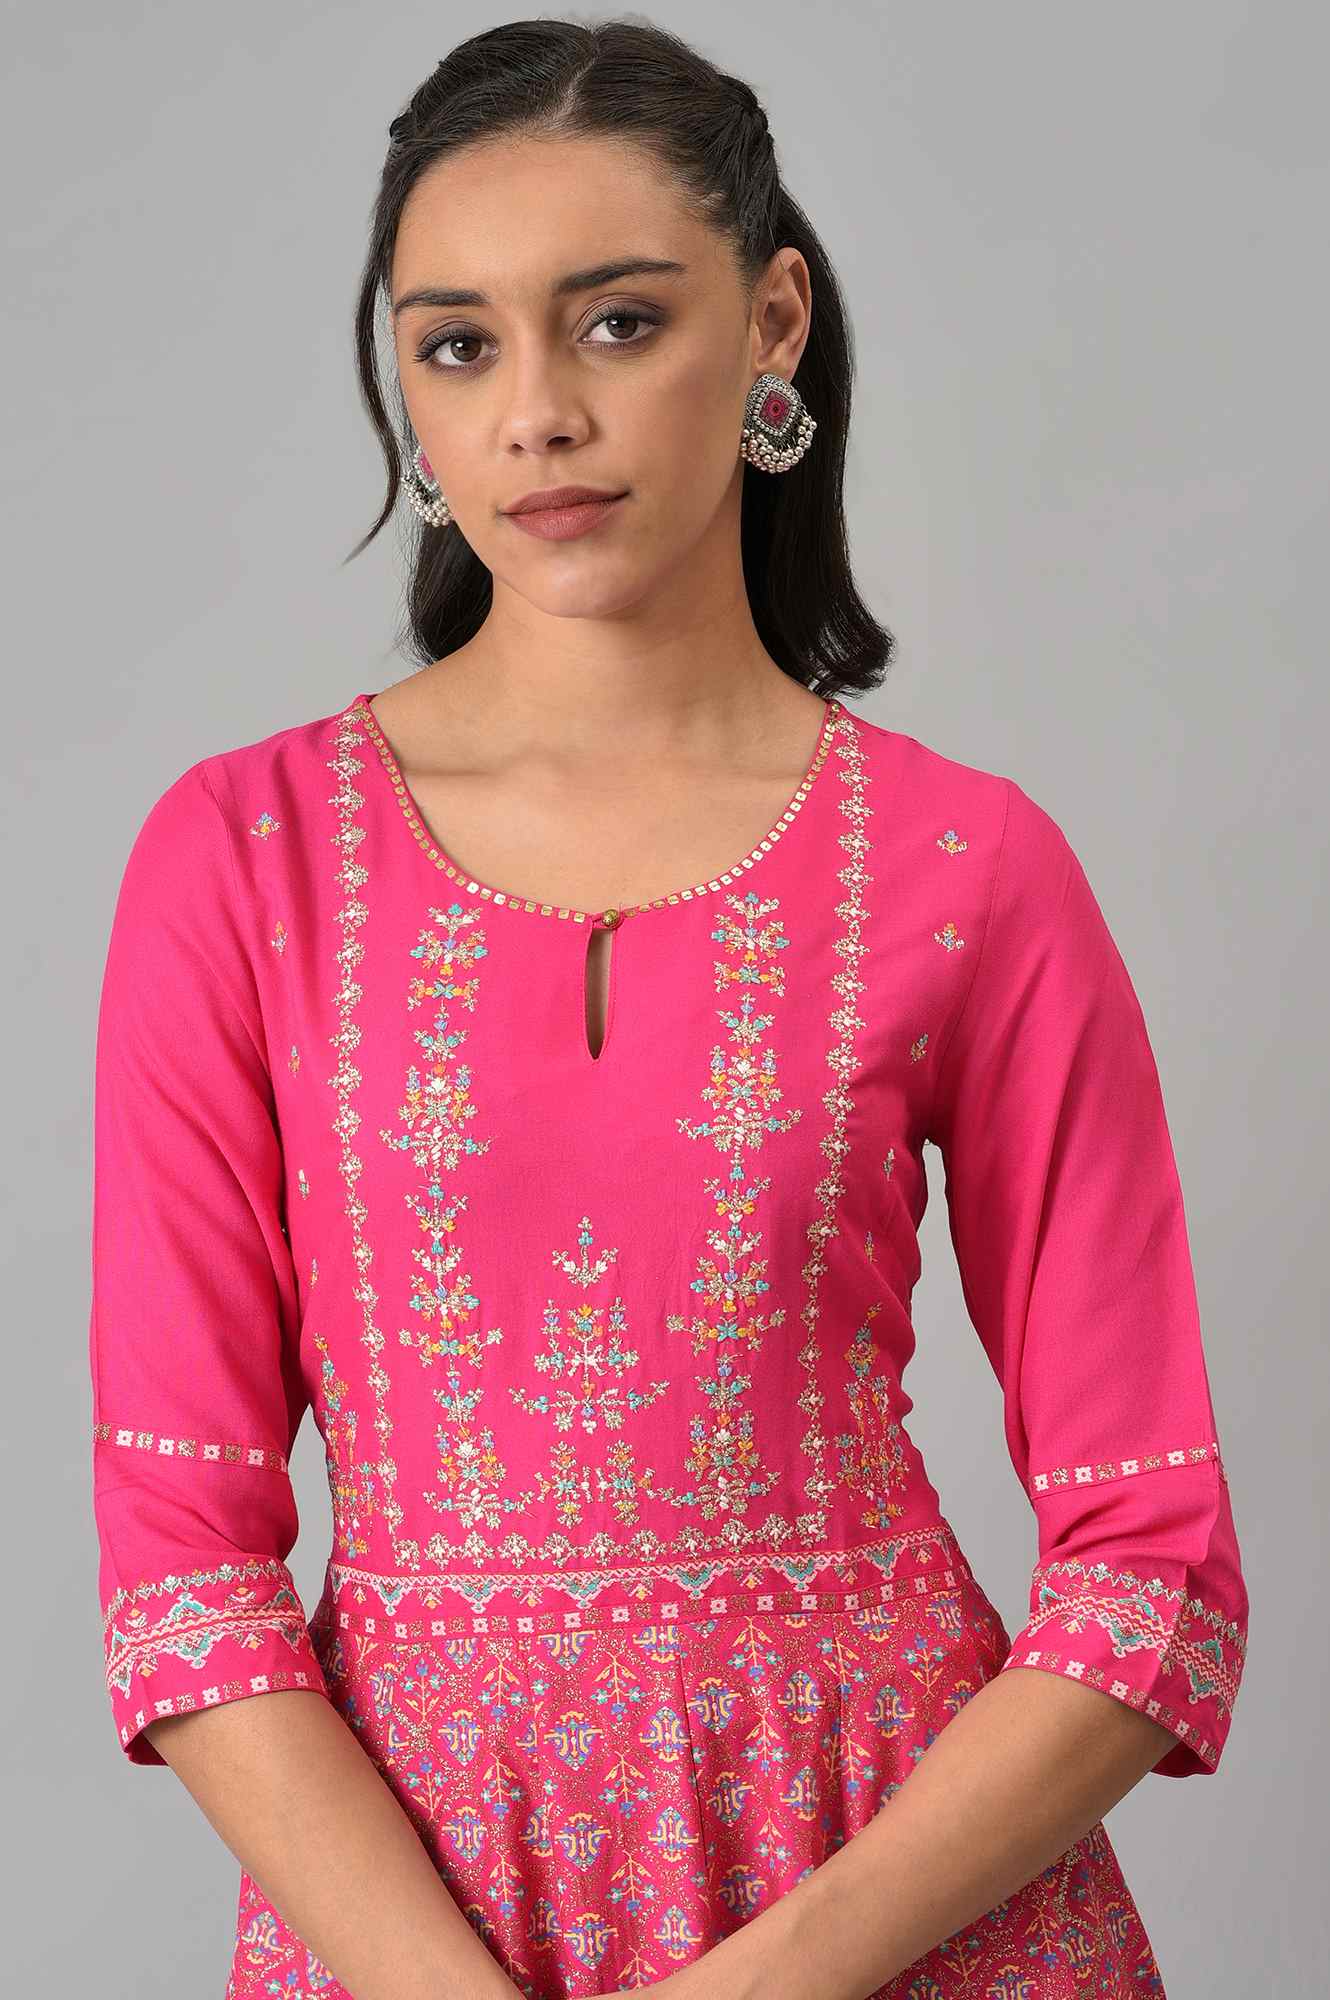 Bright Rose Pink Glitter Printed Dress With Embroidery